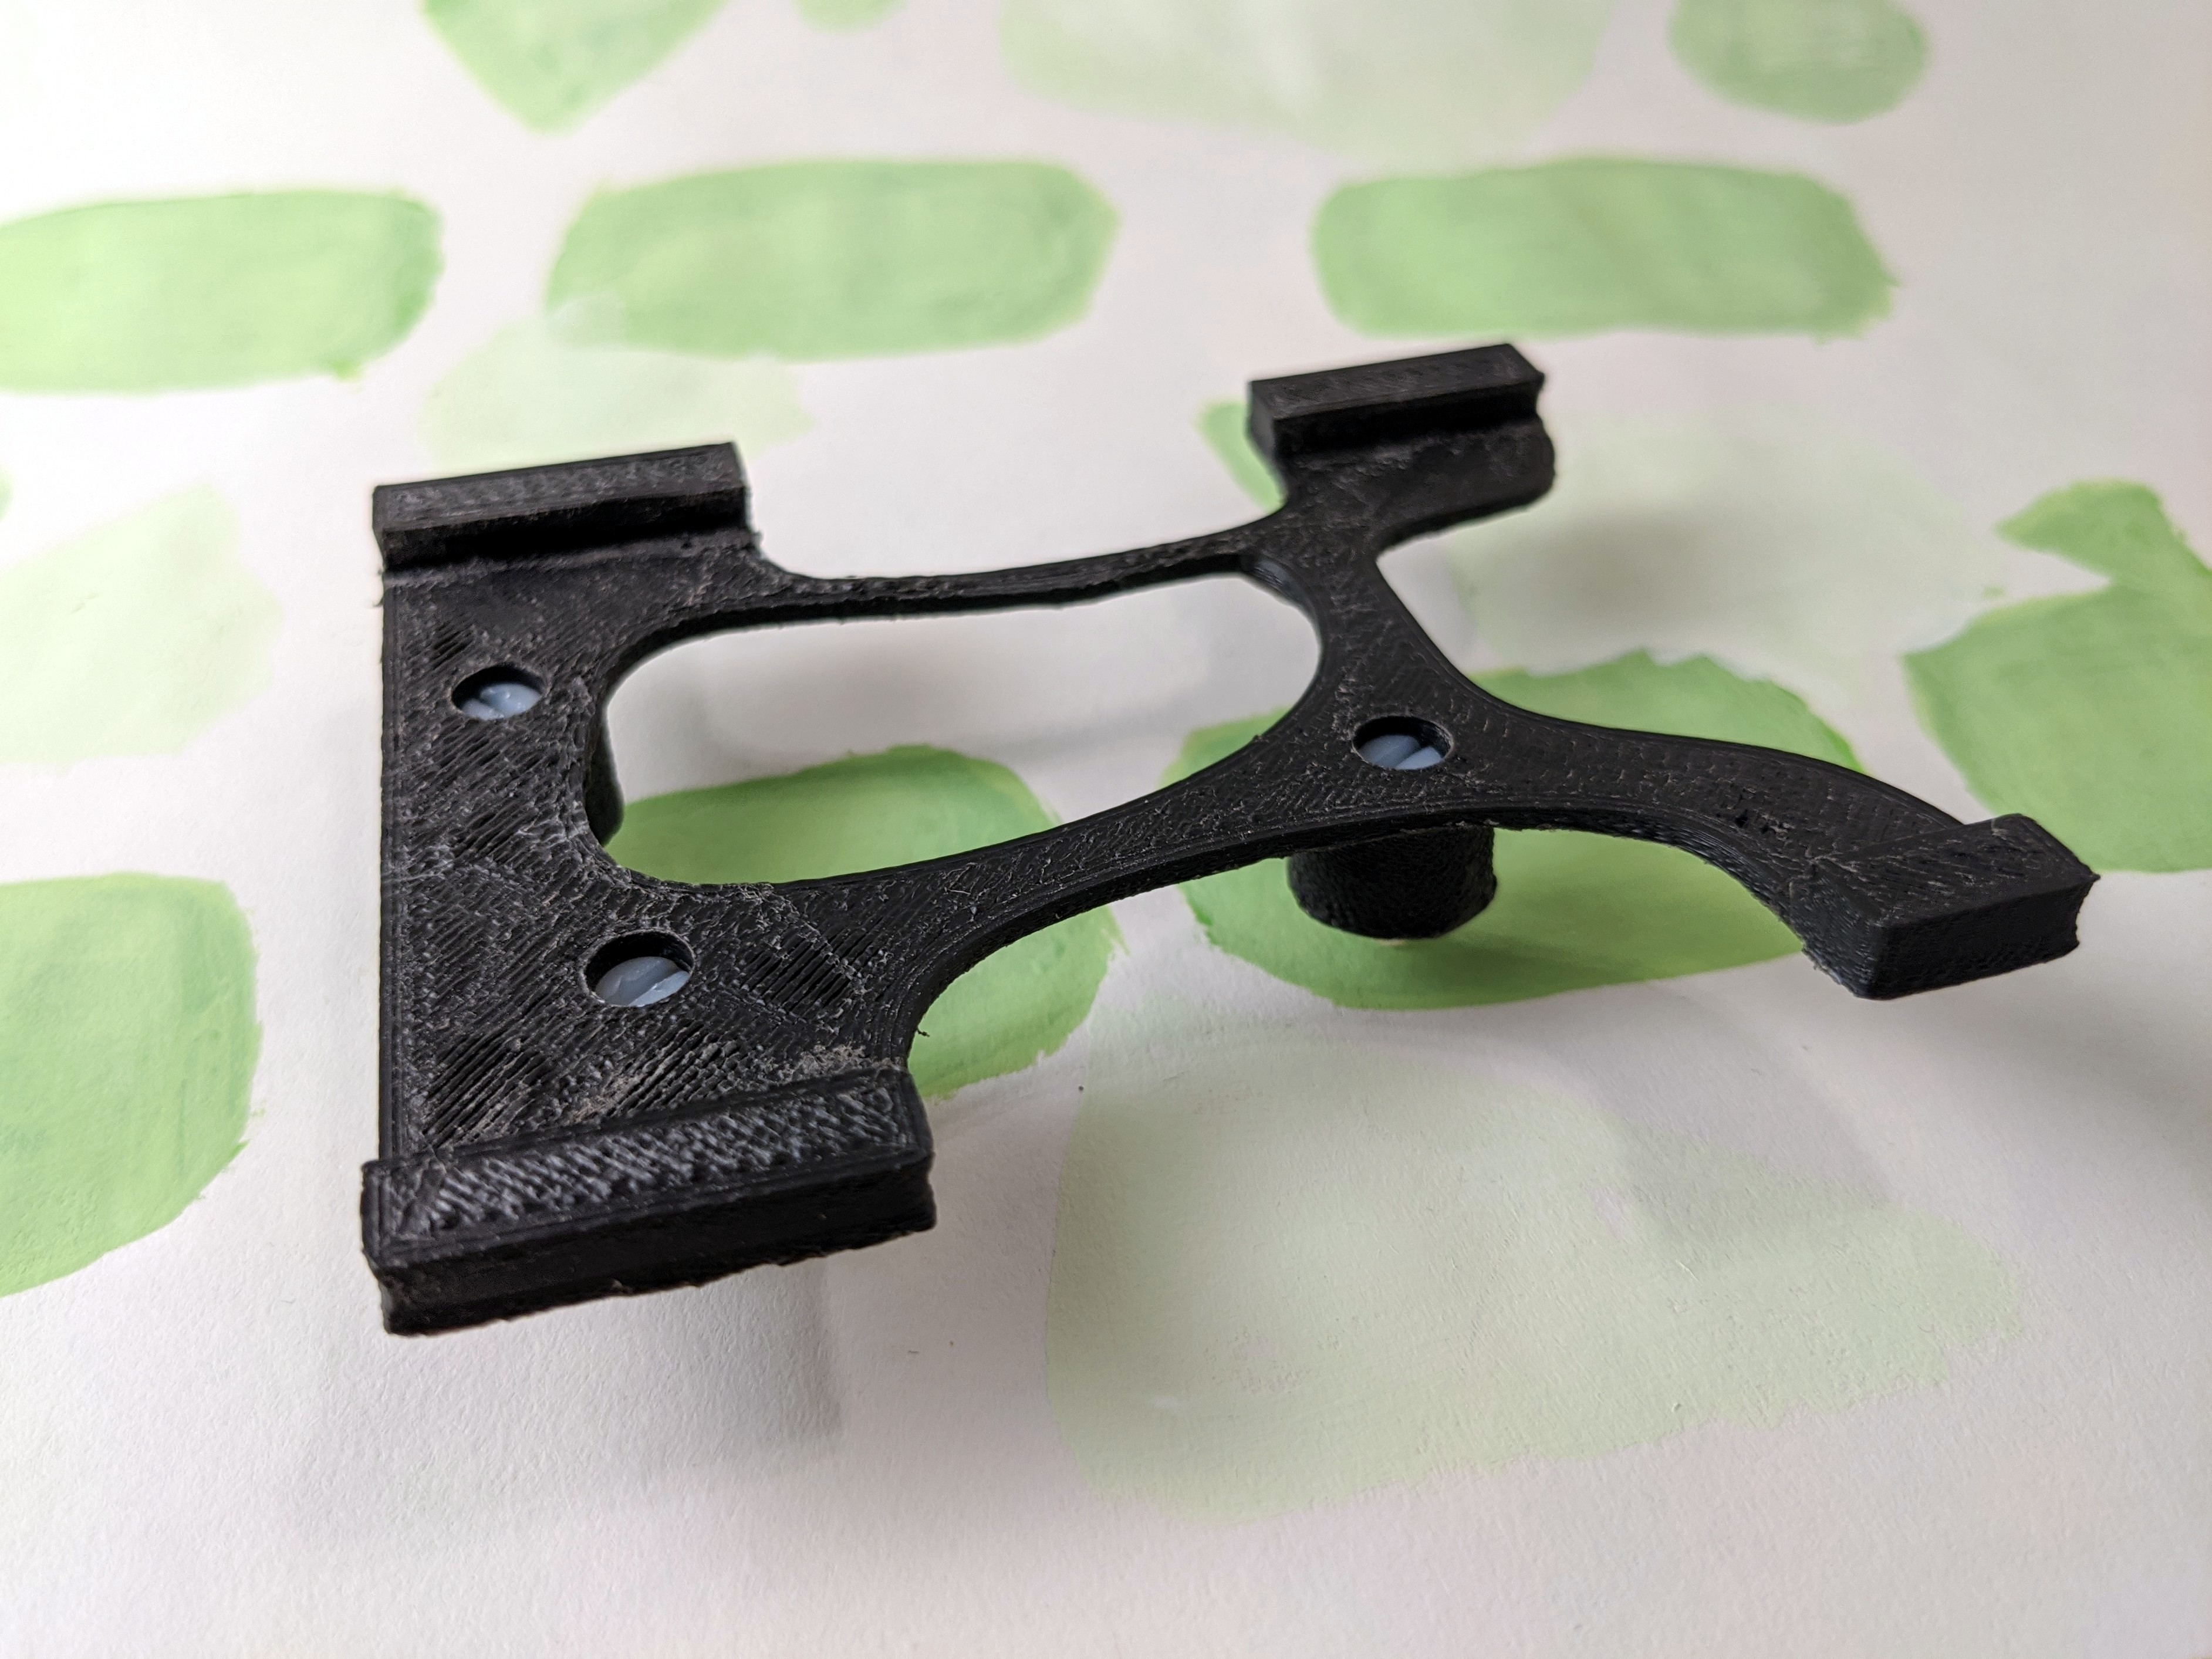 3D-printed anchoring structure